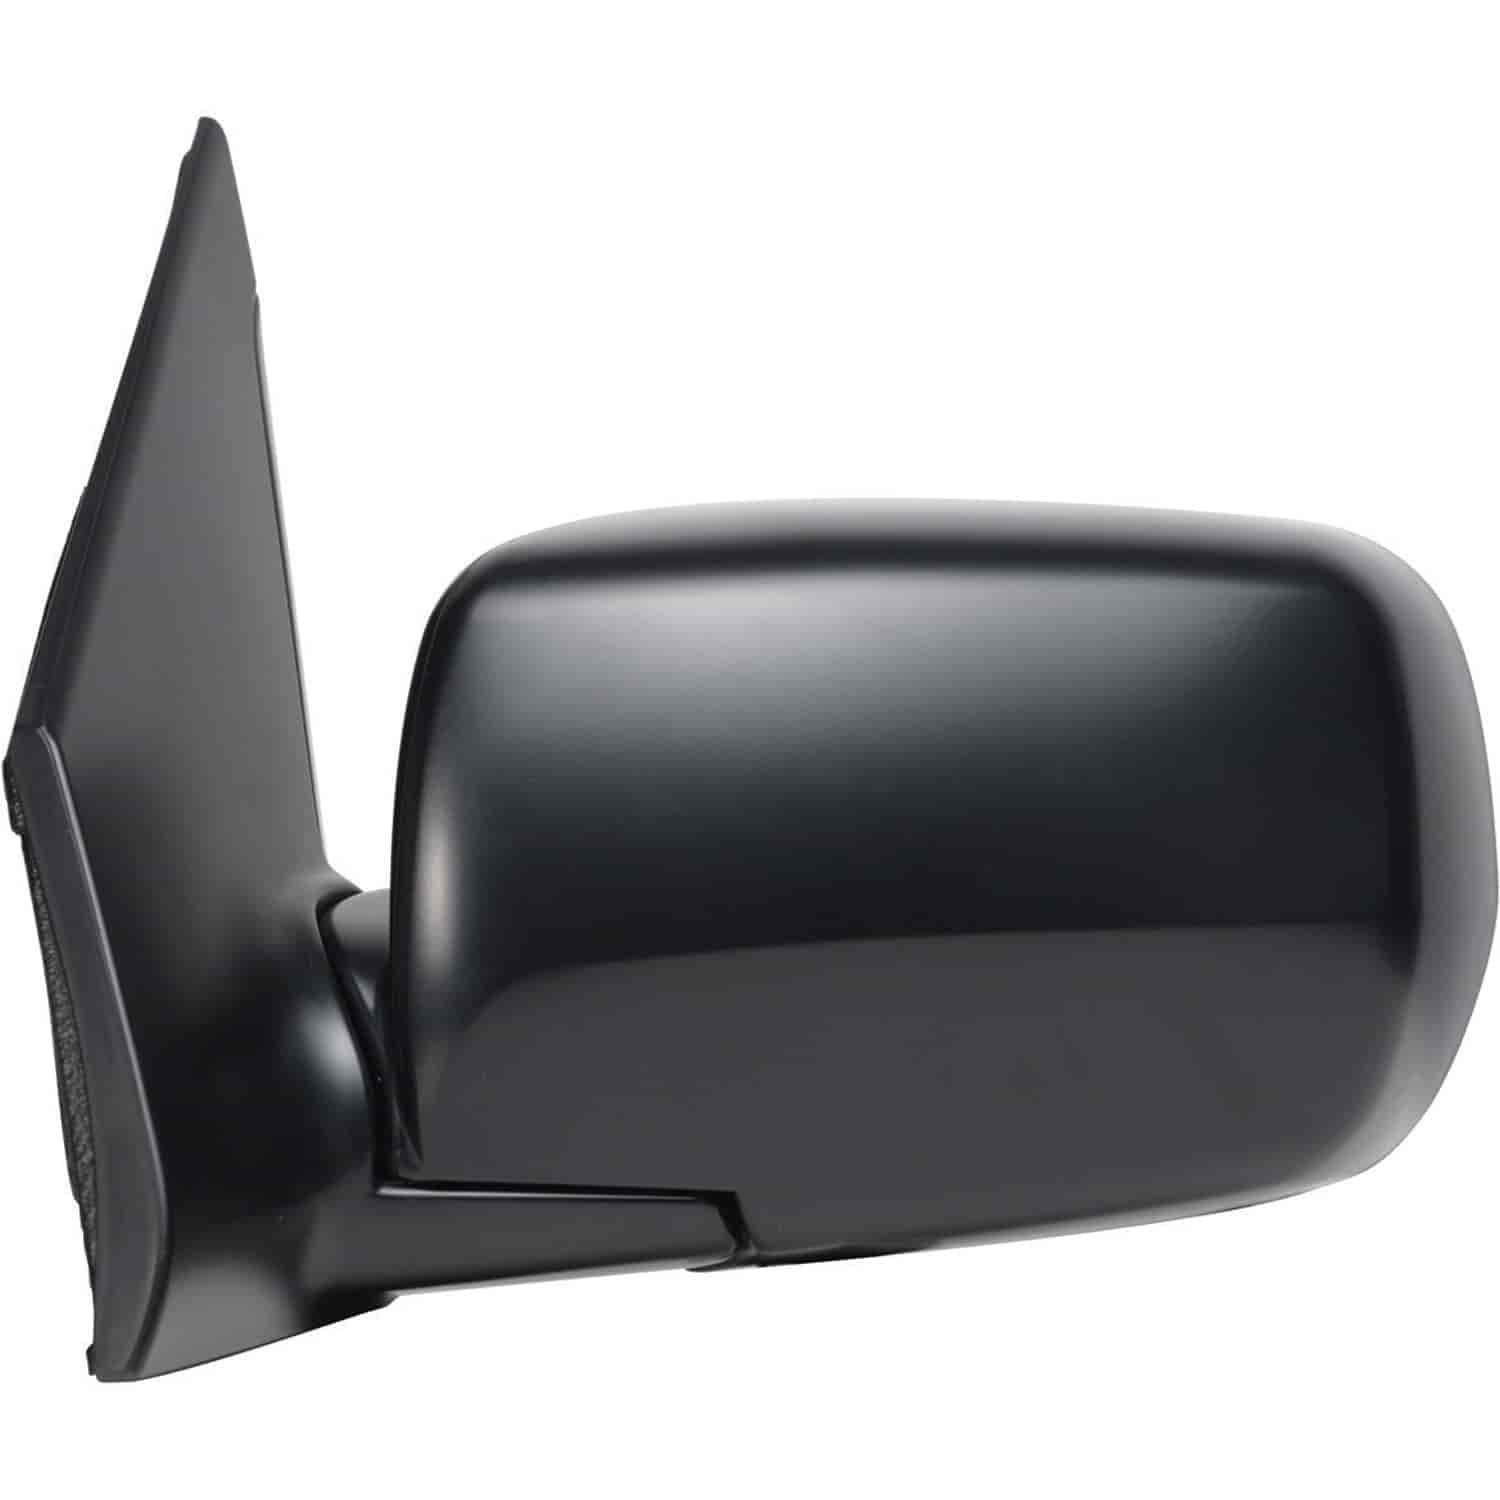 OEM Style Replacement mirror for 03-08 Honda Pilot driver side mirror tested to fit and function lik